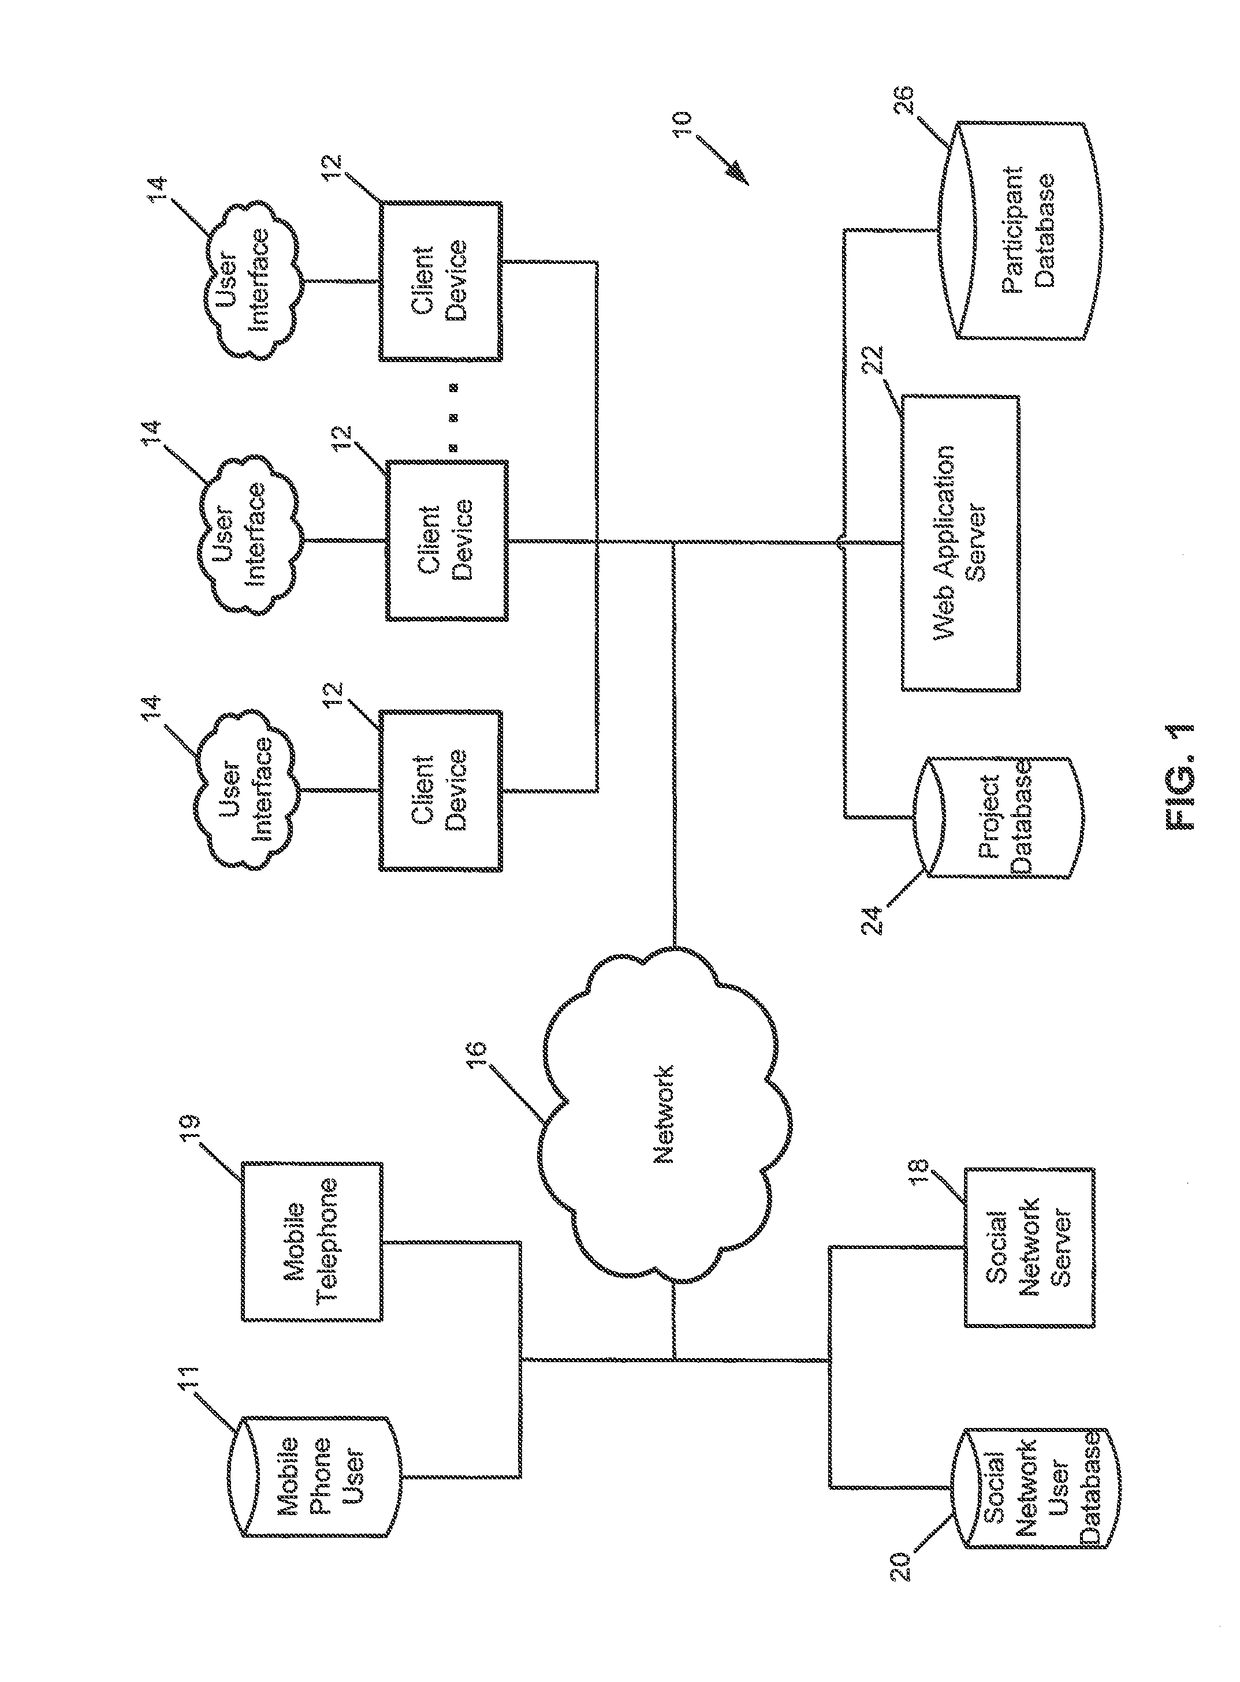 System and method for tracking and validating social and environmental performance